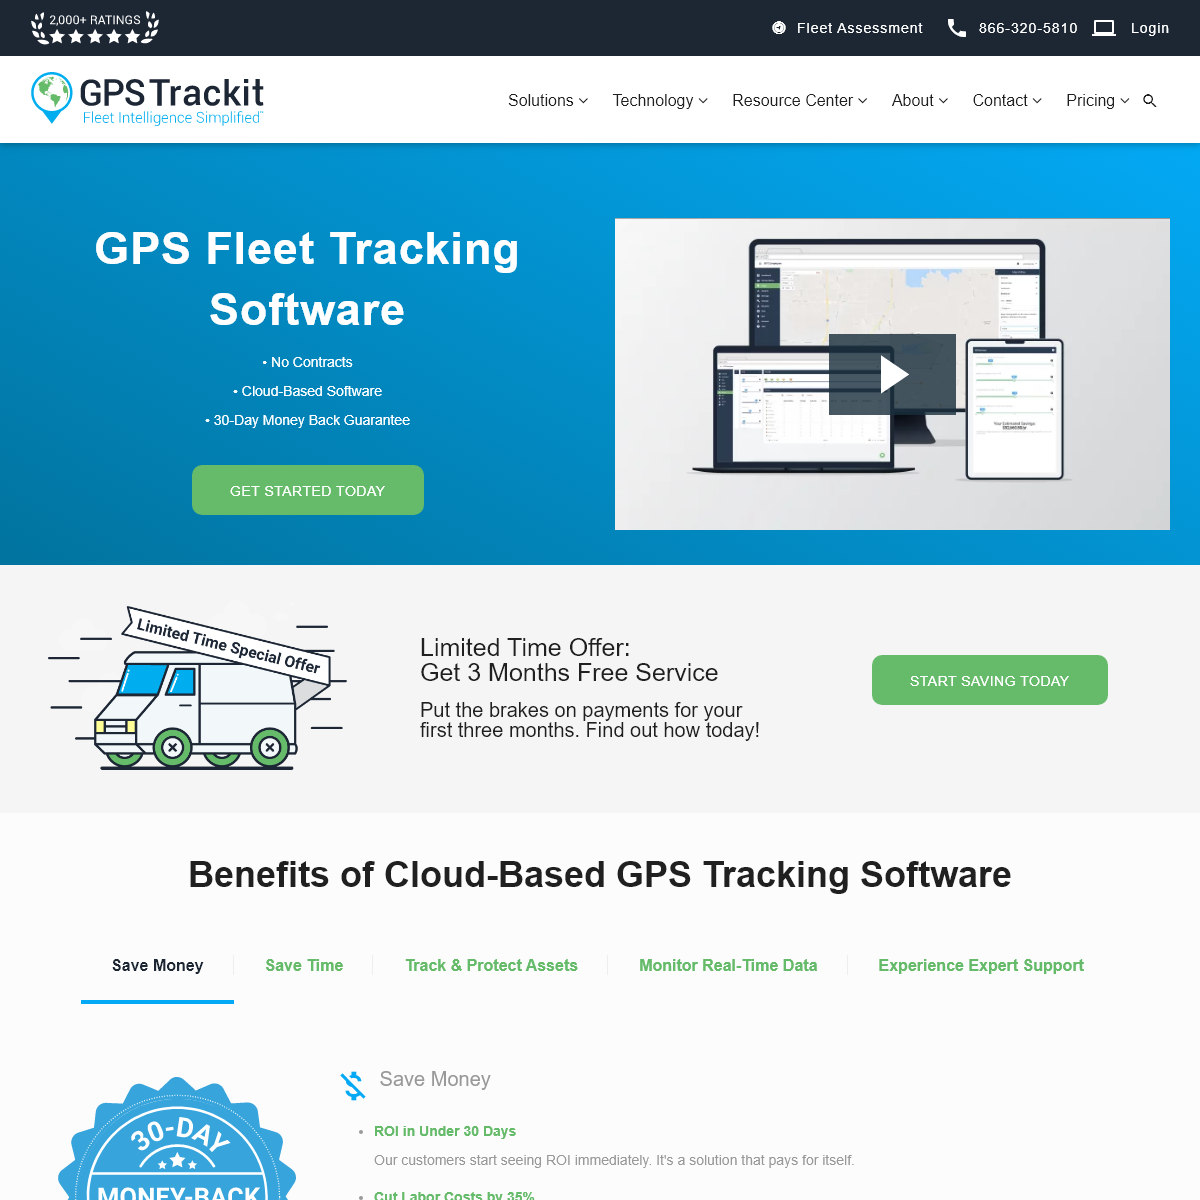 A complete backup of gpstrackit.com